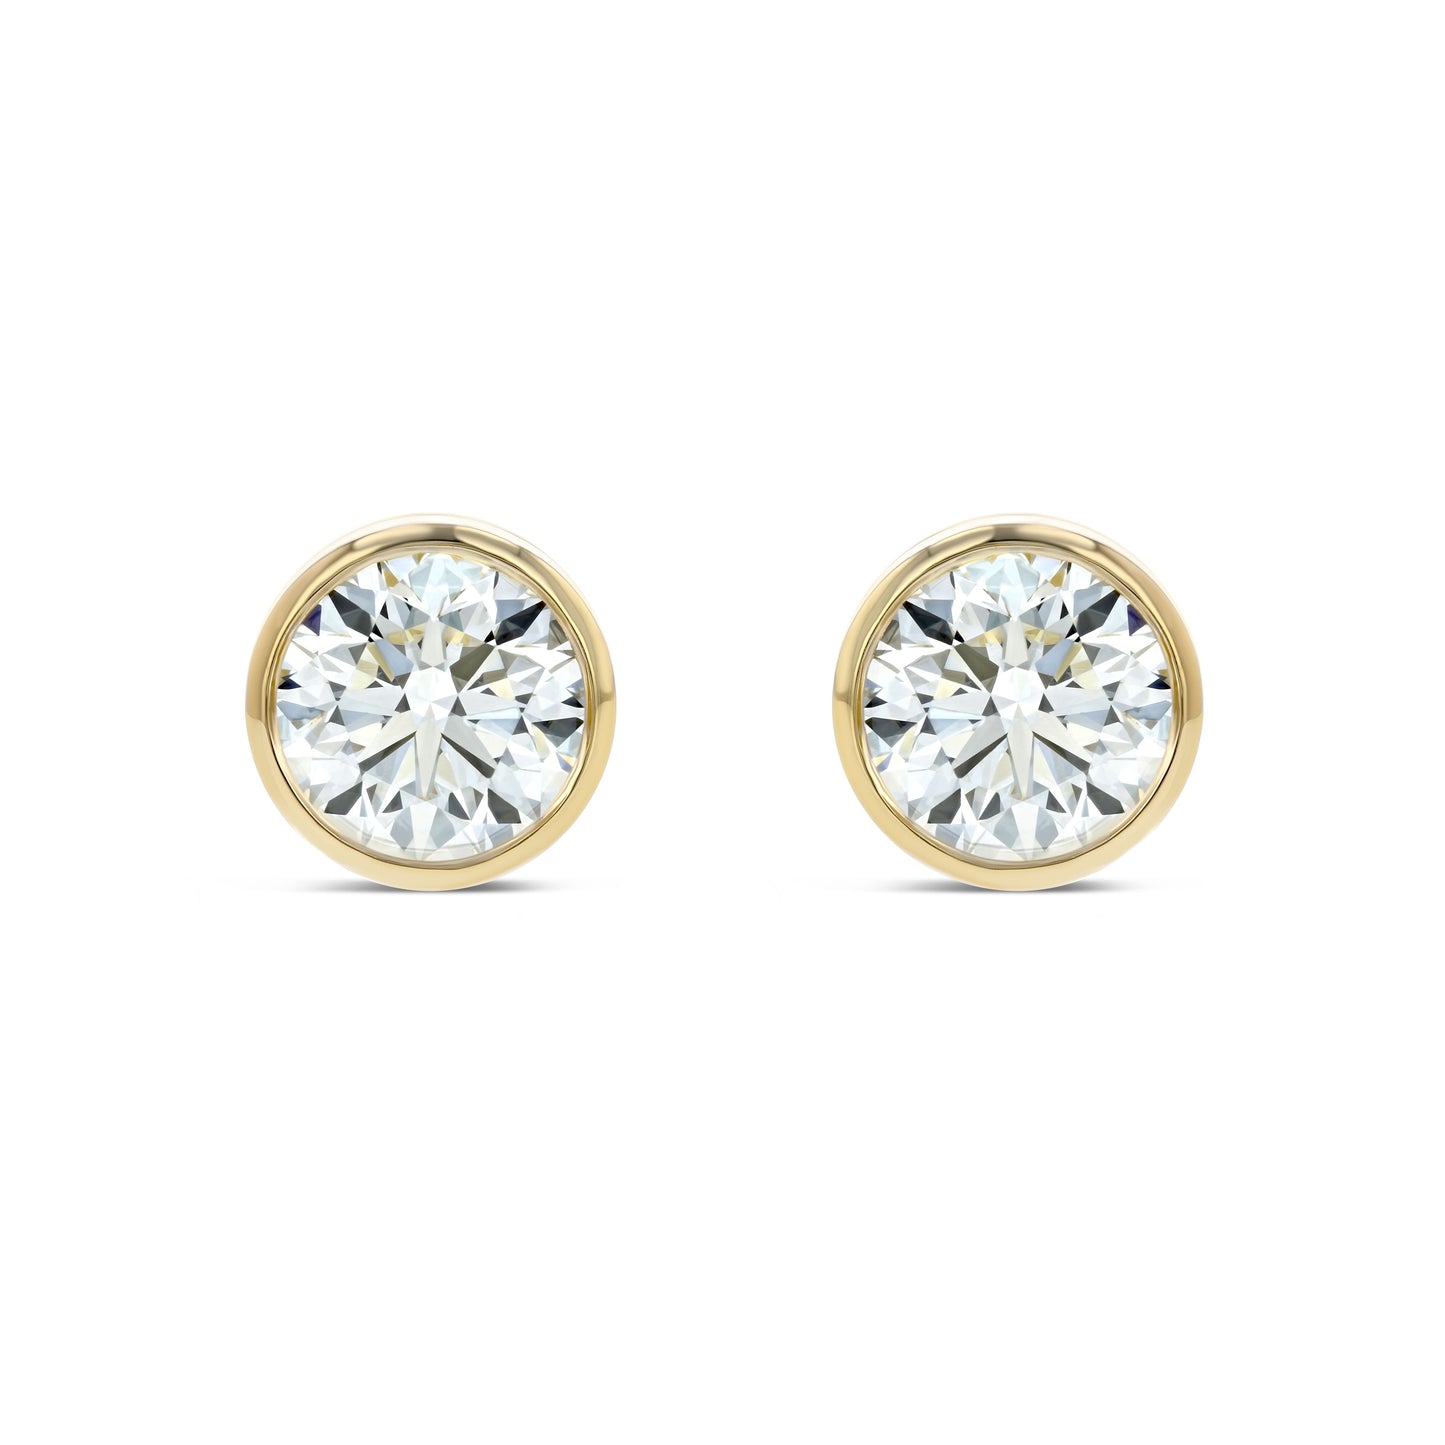 18k Yellow Gold Bezel Round Diamond Stud Earrings 1ctw (5.2mm Ea), H Color, Si3-i1 Clarity